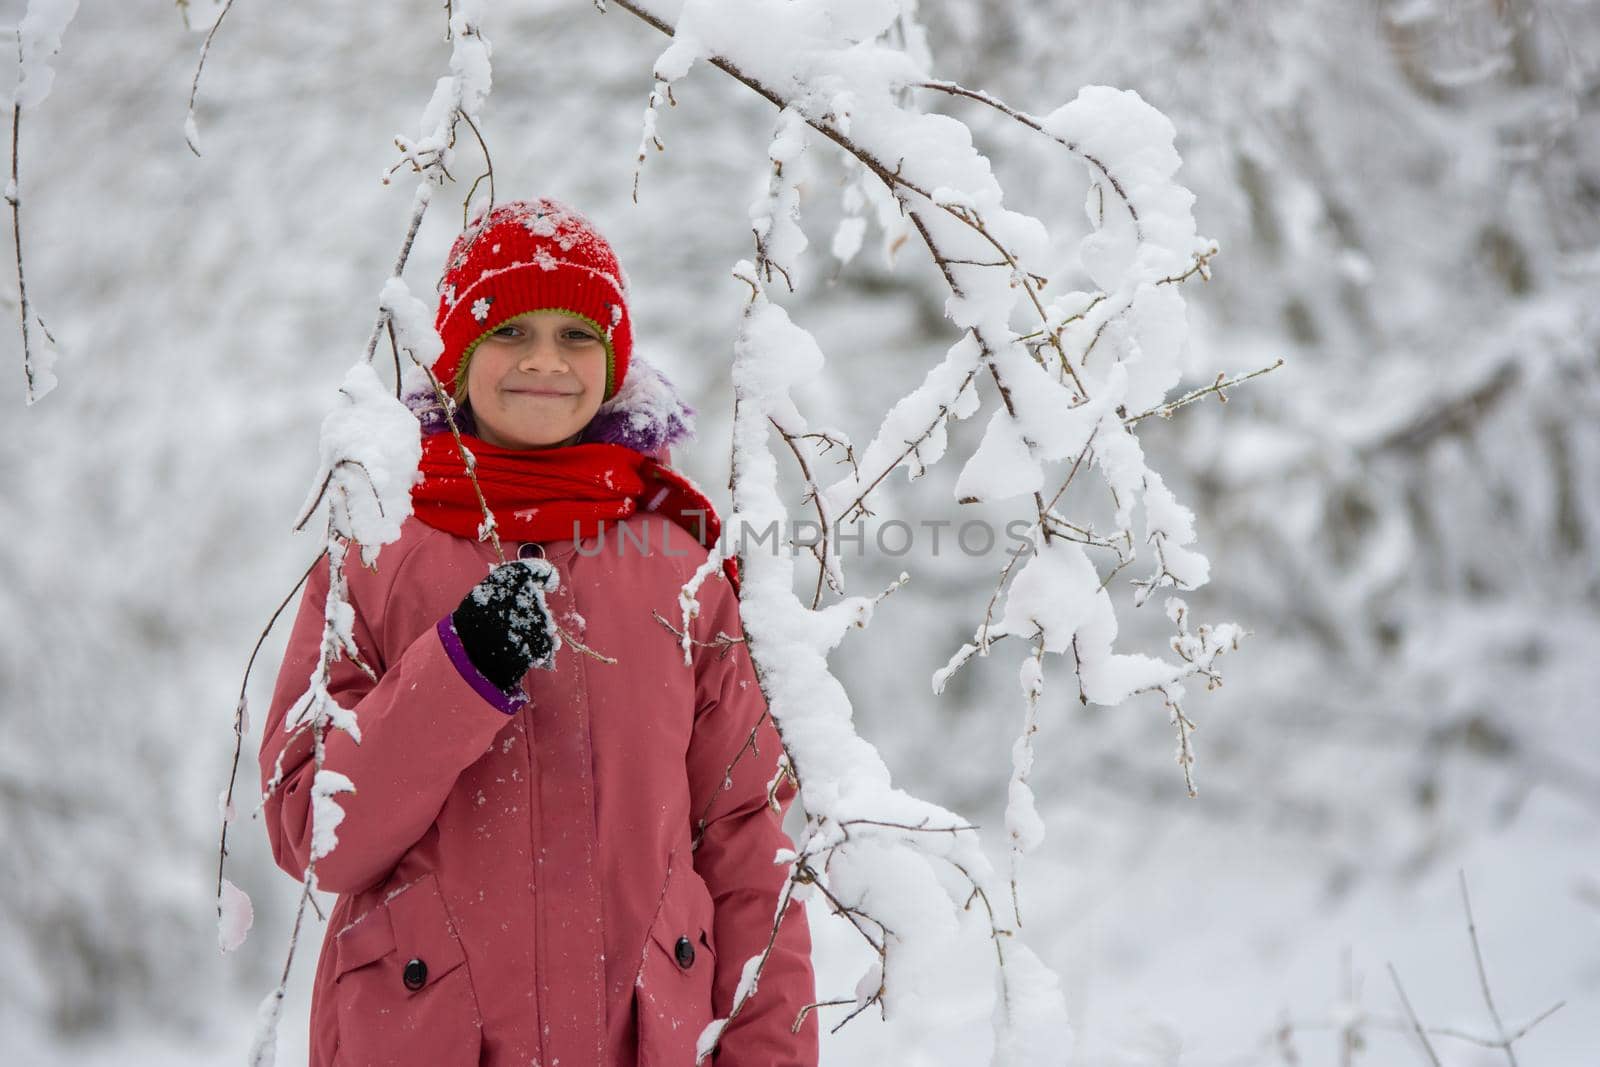 Happy girl stands in a snowy forest under a snowy branch